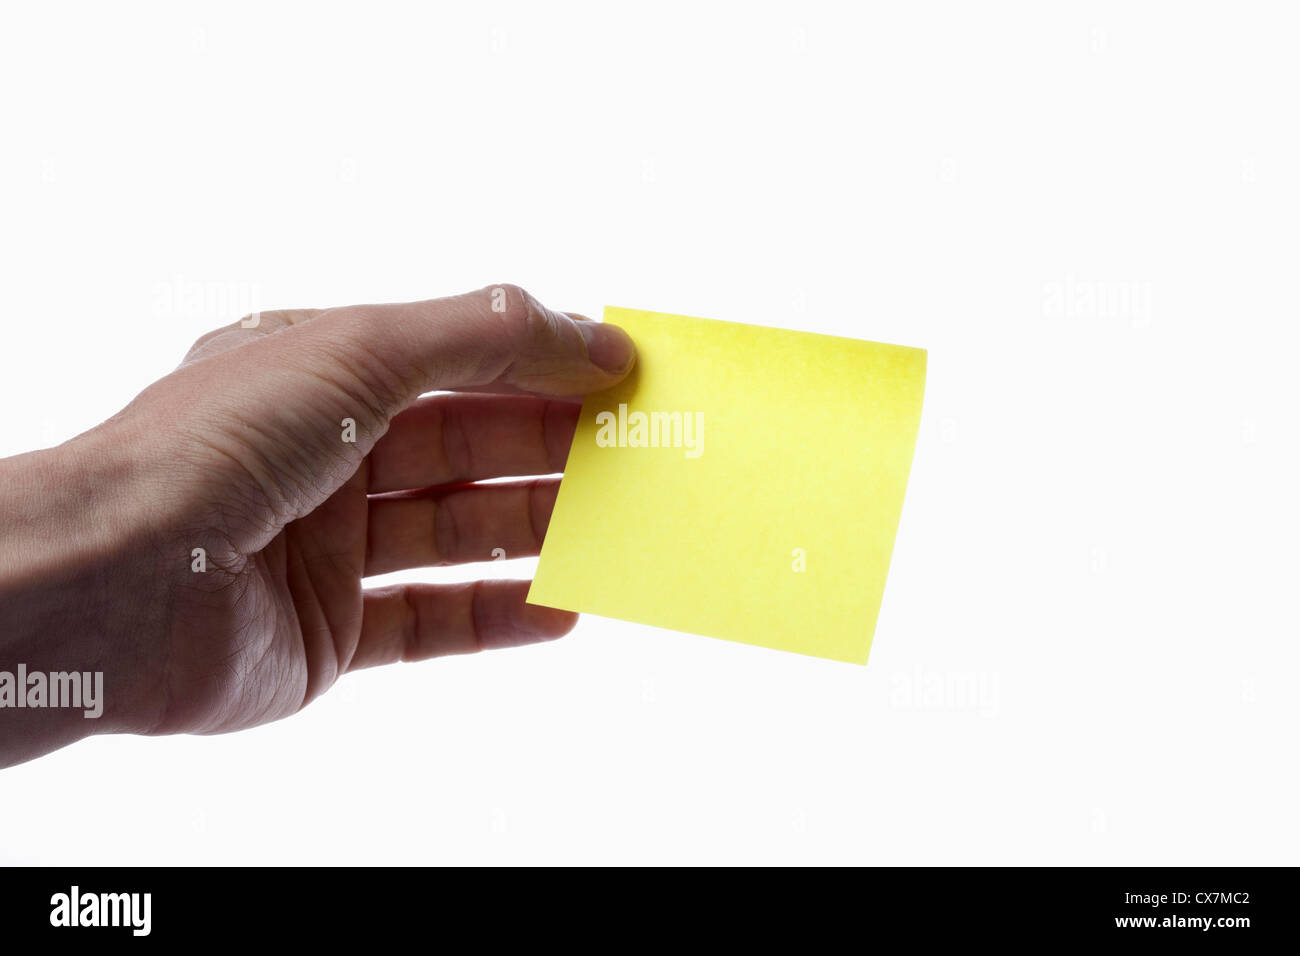 A man holding a blank yellow adhesive note, close-up of hand Stock Photo